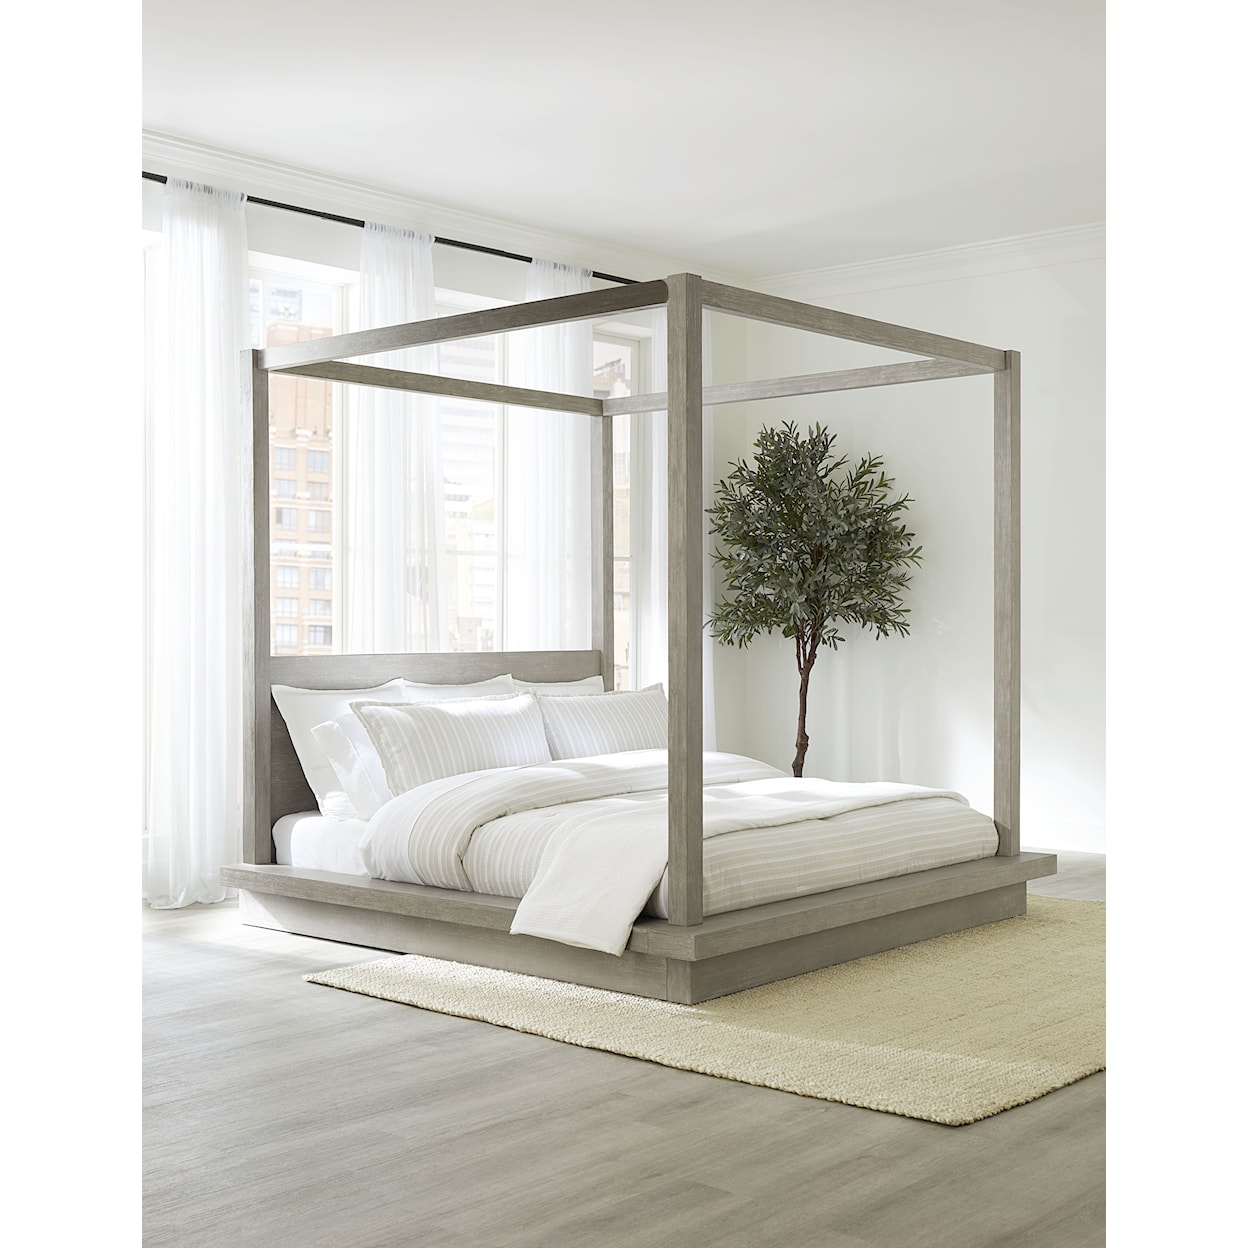 Modus International Melbourne Queen Wood Canopy Bed